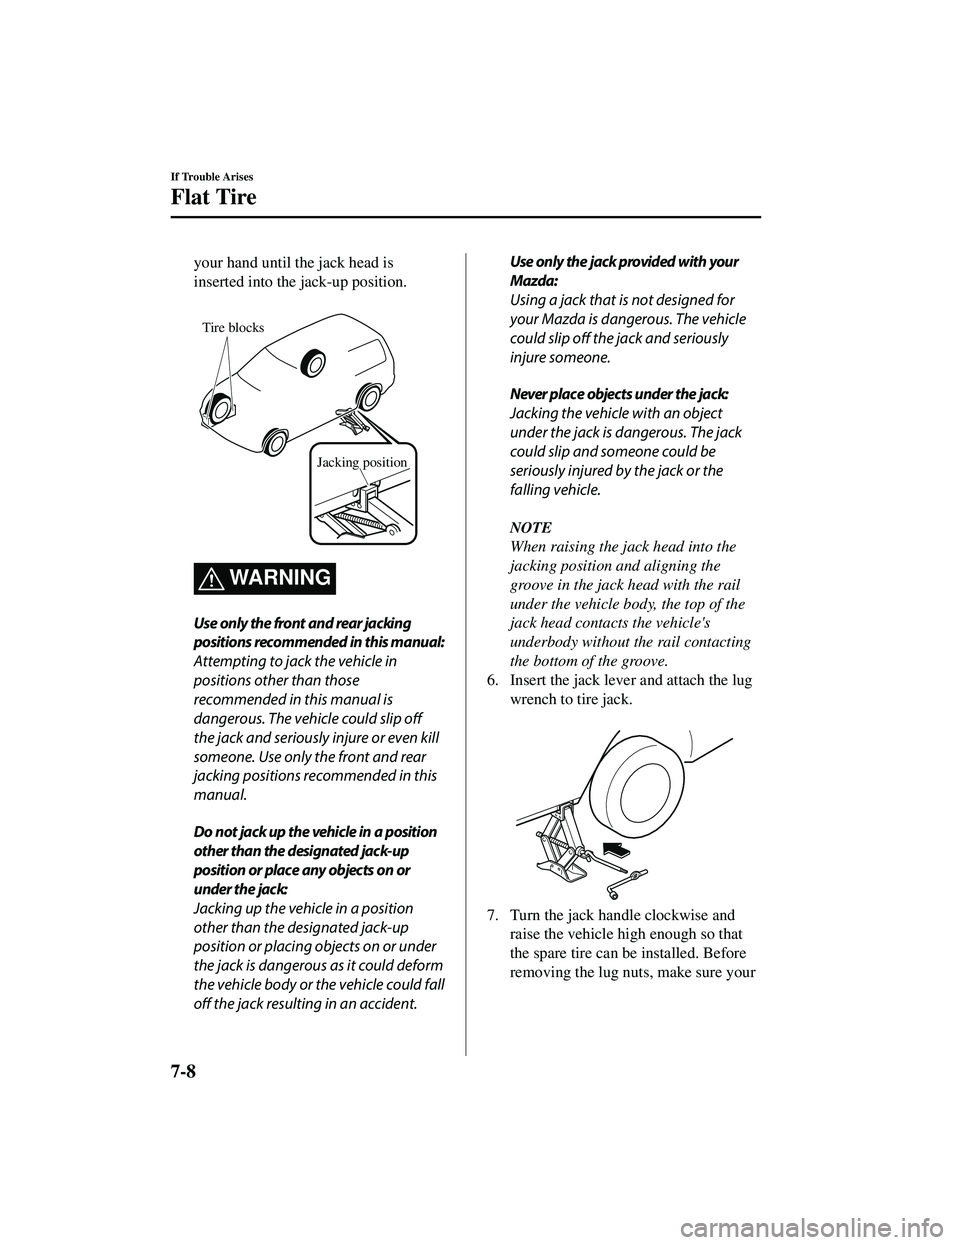 MAZDA MODEL CX-5 2021  Owners Manual your hand until the jack head is
inserted into the jack-up position.
 
Tire blocksJacking position
WA R N I N G
Use only the front and rear jacking
positions recommended in this manual:
Attempting to 